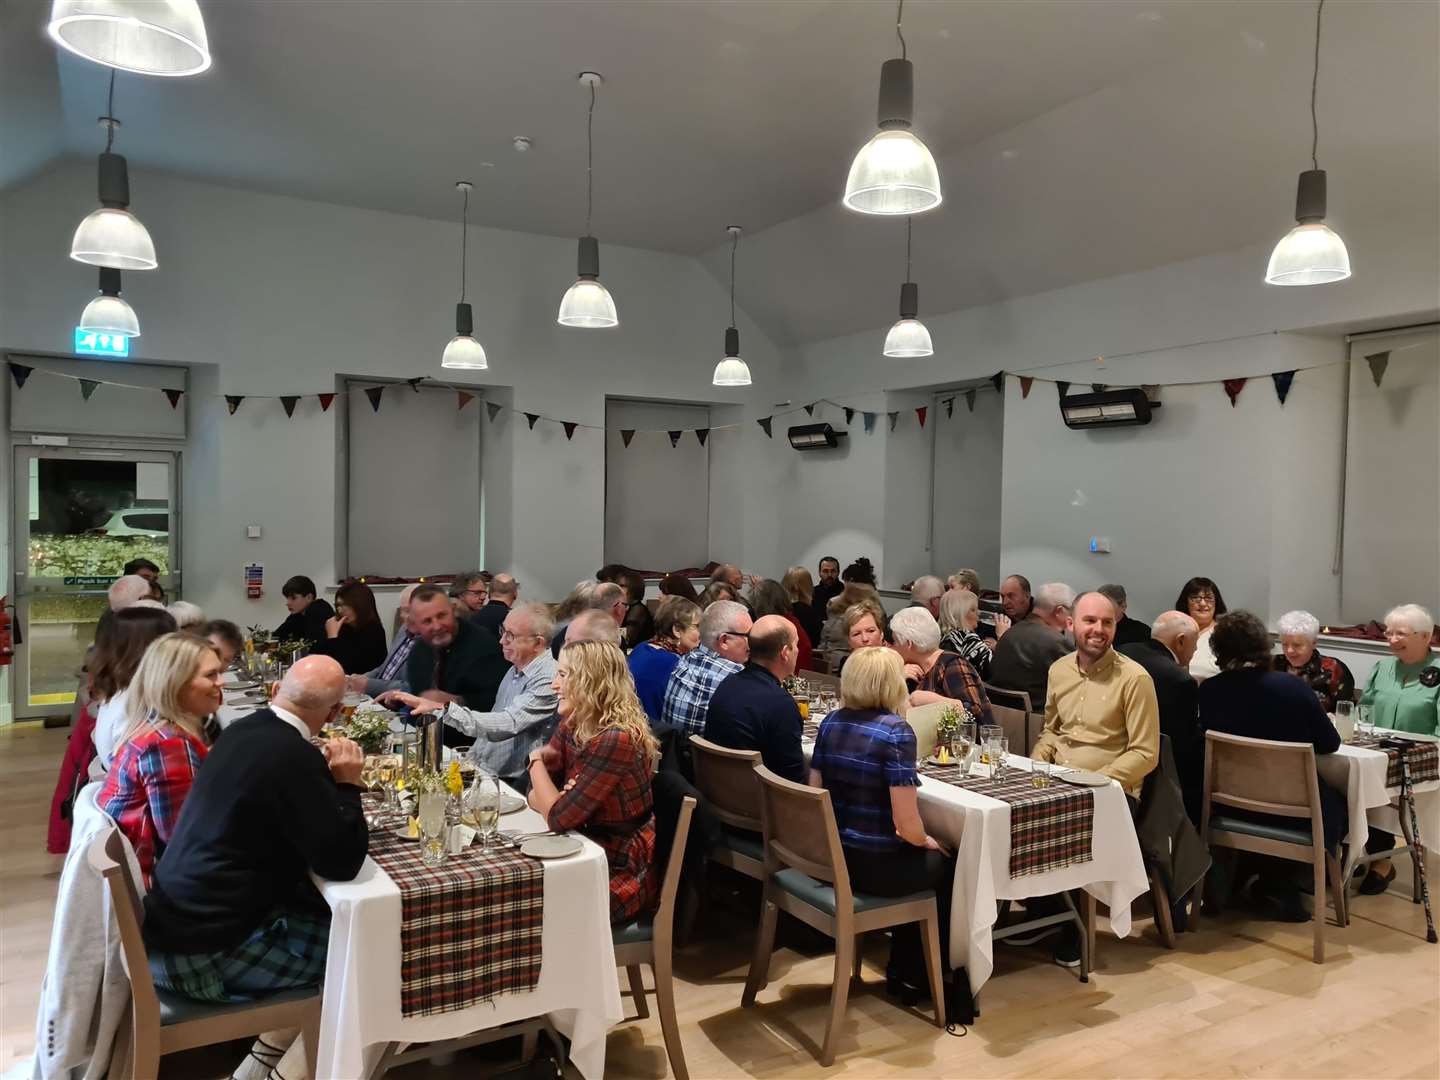 The renovated former Embo Primary School was the perfect venue for the Burns supper. Picture: Alexander MacDonald